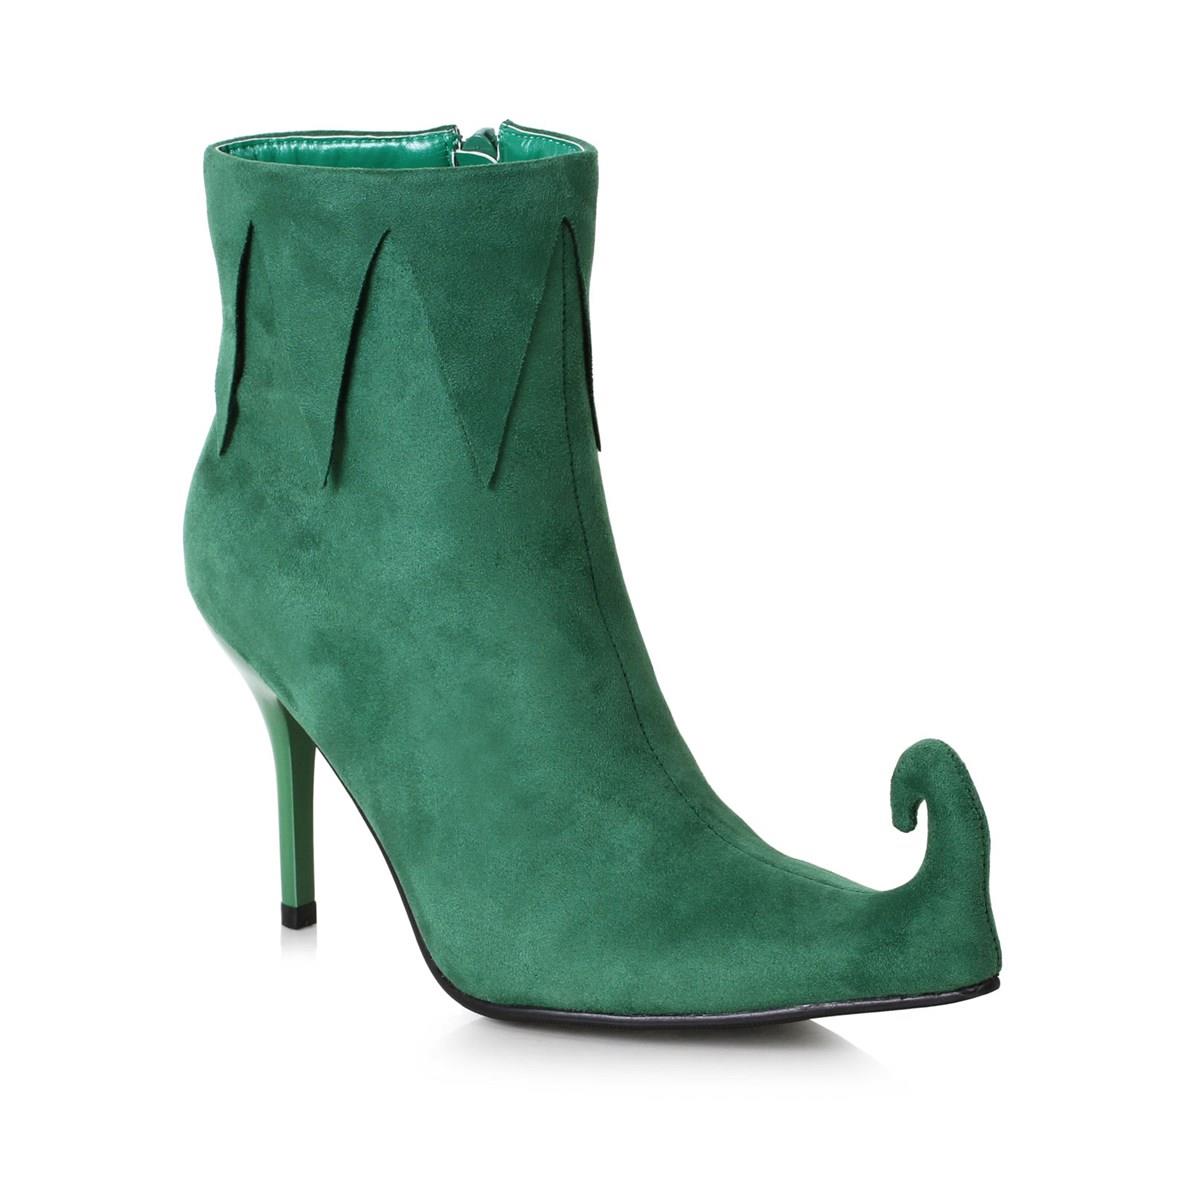 Picture of Ellie Shoes 276411 3 in. Womens Heel Holiday Boot, Green - Size 8